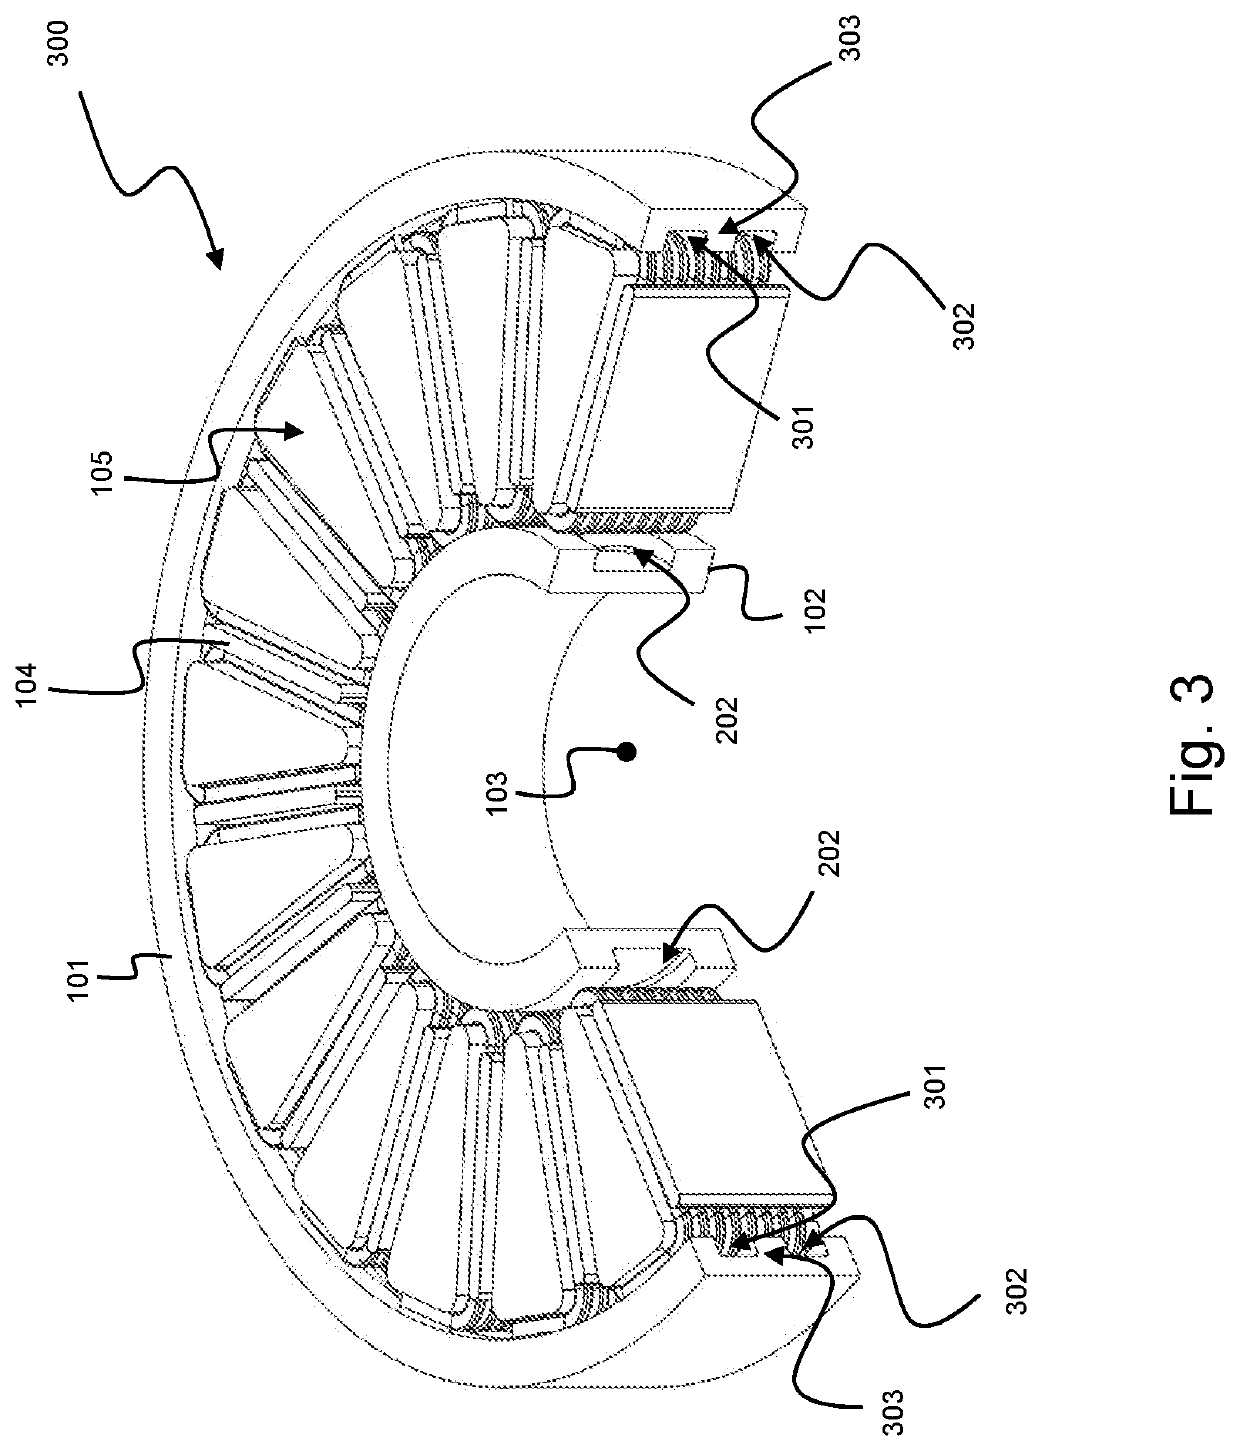 Cooling mechanism of a stator for an axial flux machine